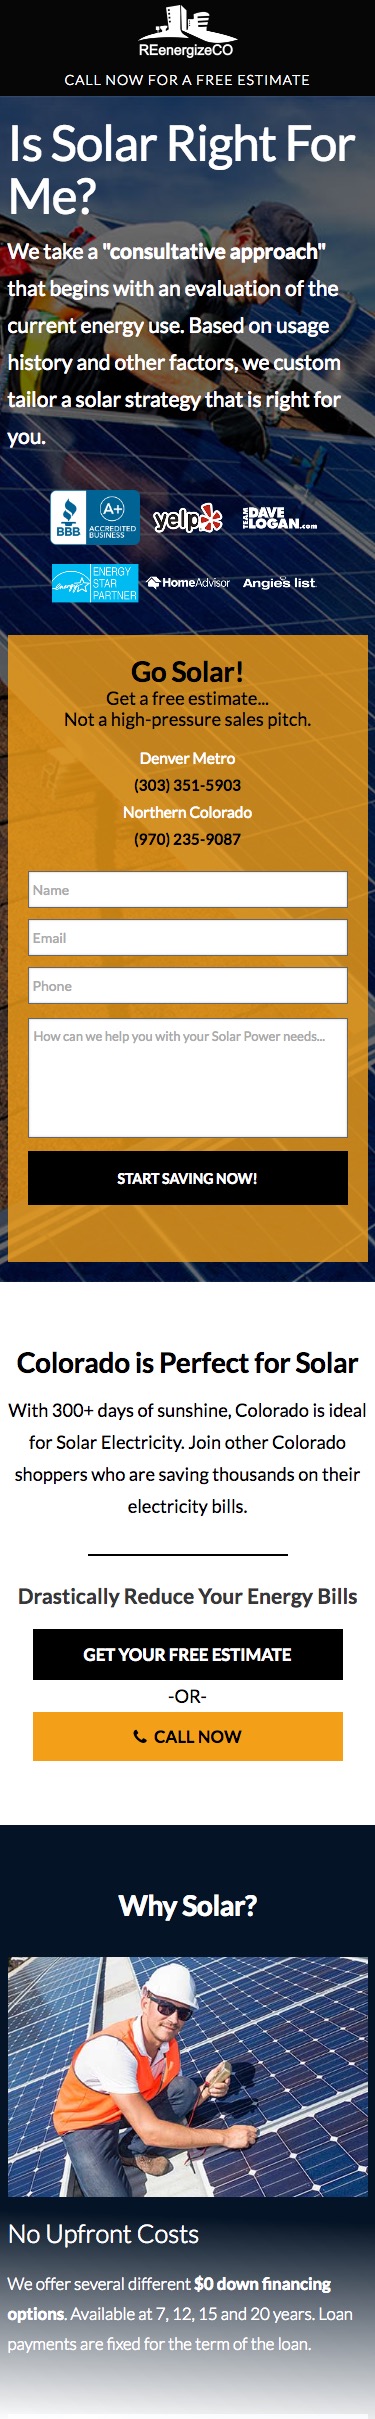 Go Solar website, as viewed on a mobile browser. The page narrow and very tall.